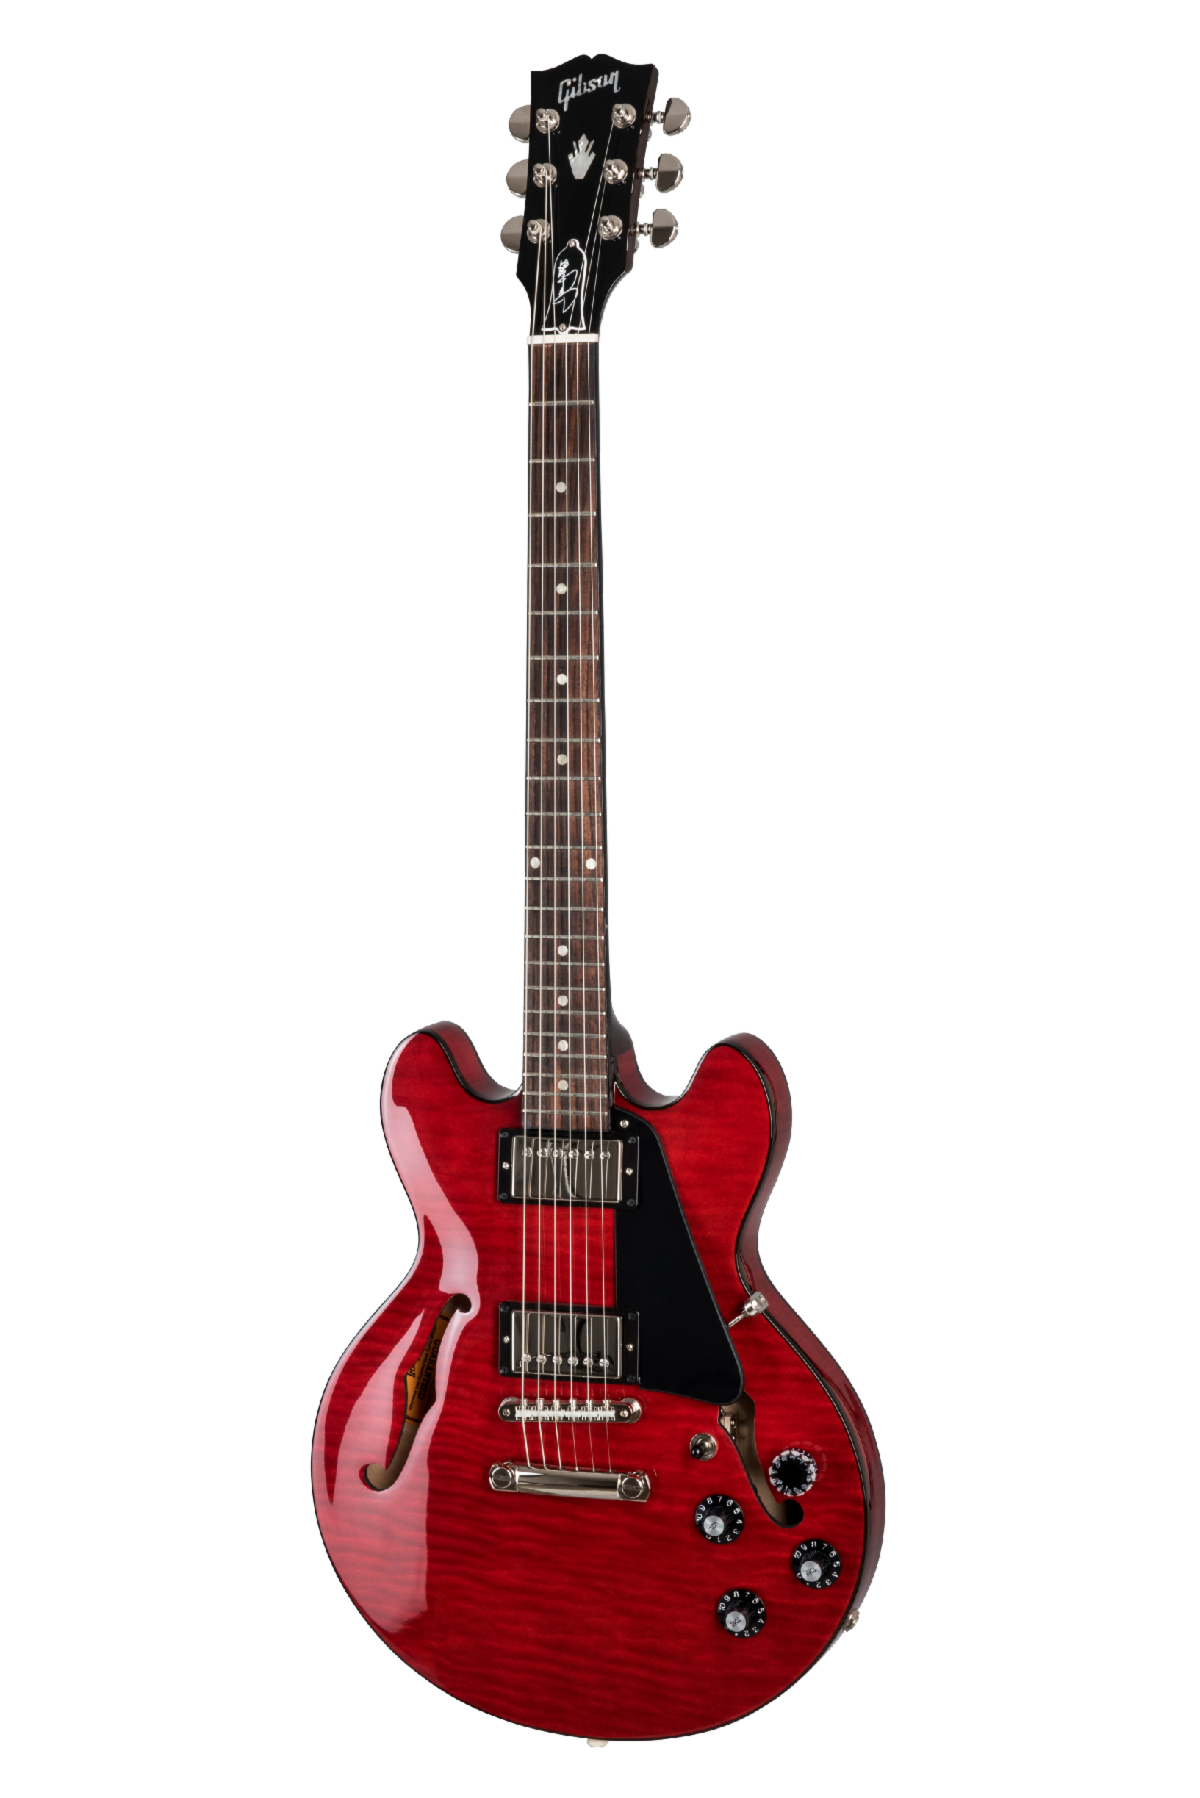 Joan Jett To Perform On Rolling Stone’s “In My Room,” Presented by Gibson Fri., April 24; ‘Gibson Joan Jett ES 339 Electric Guitar’ To Be Auctioned For MusiCares Covid-19 Fund